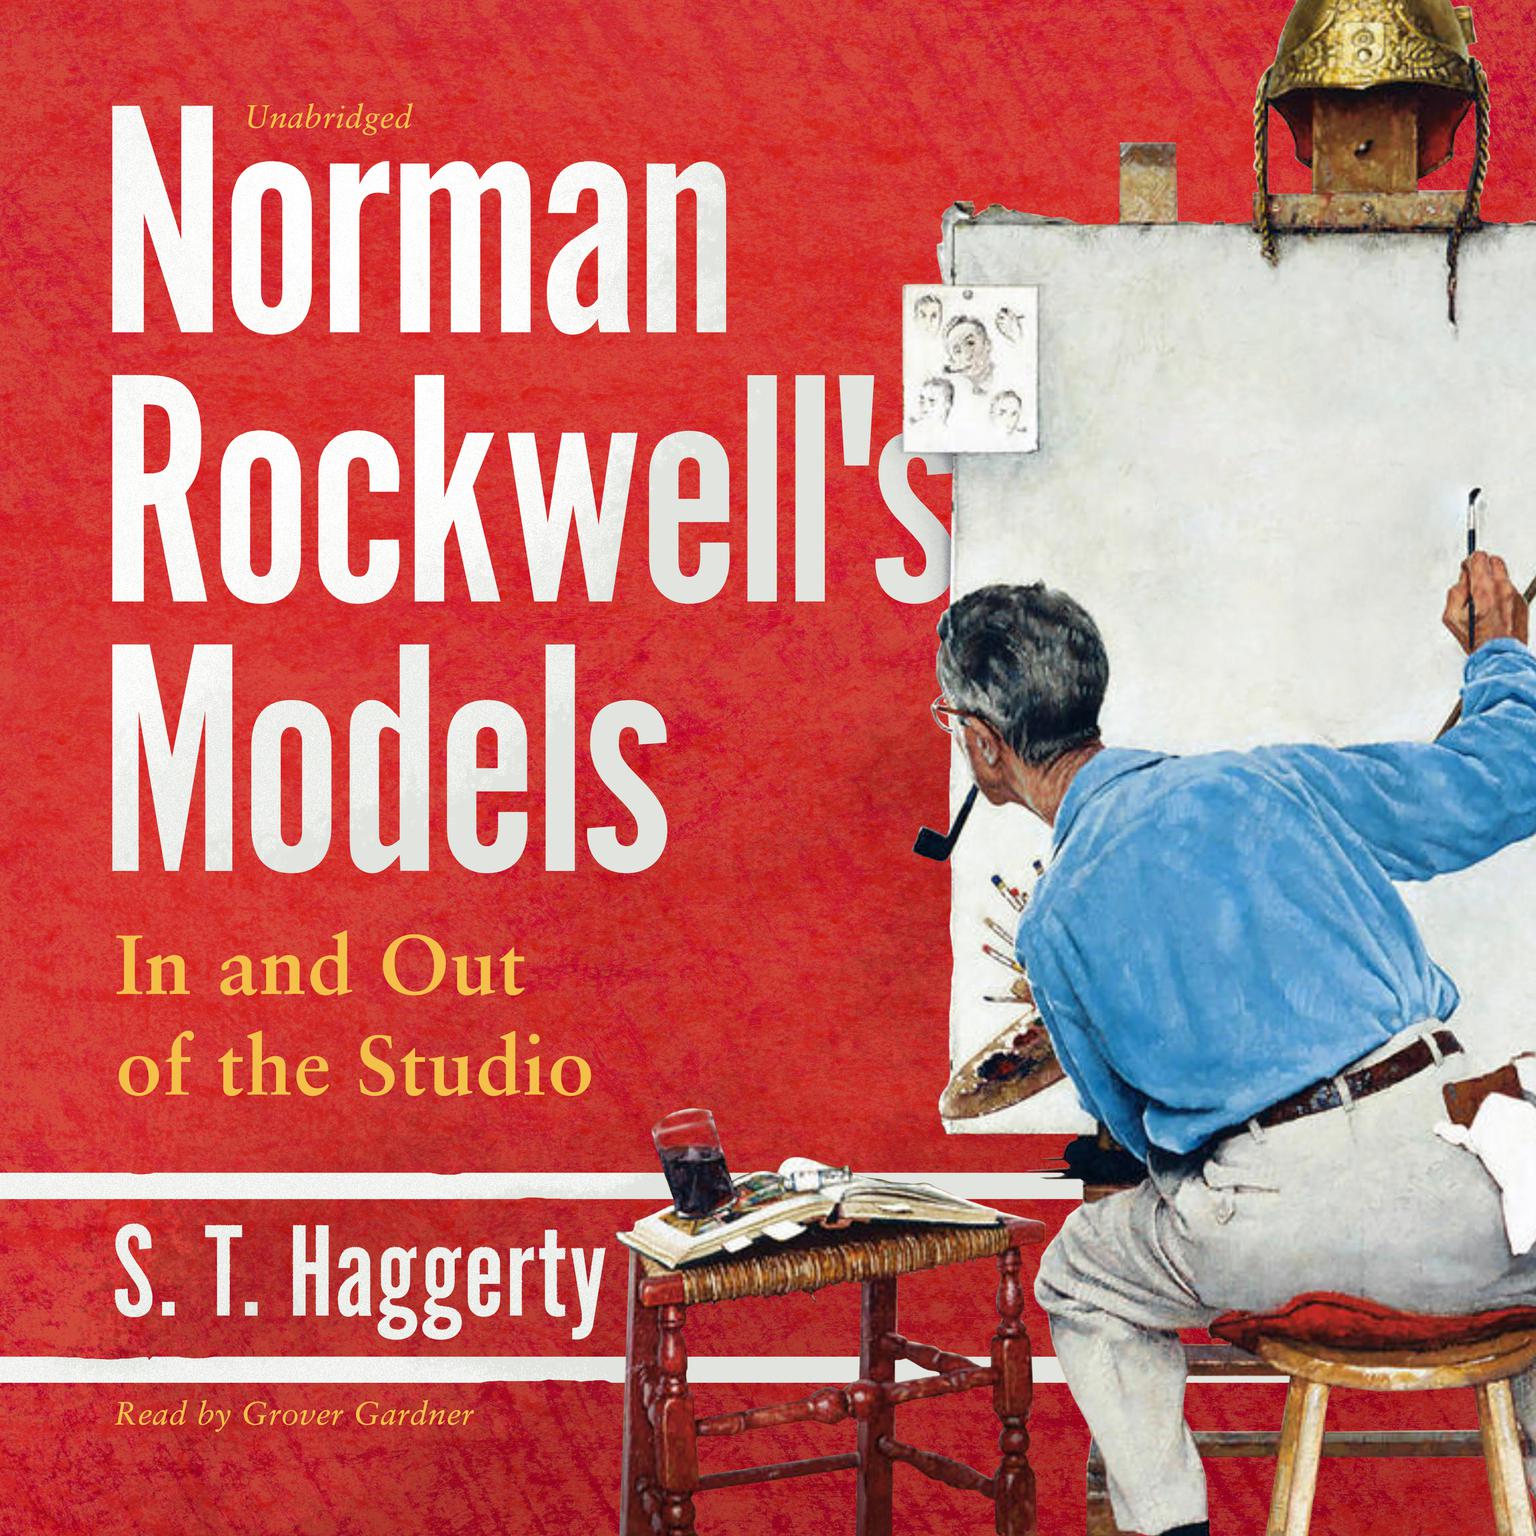 Norman Rockwells Models: In and Out of the Studio Audiobook, by S.T. Haggerty